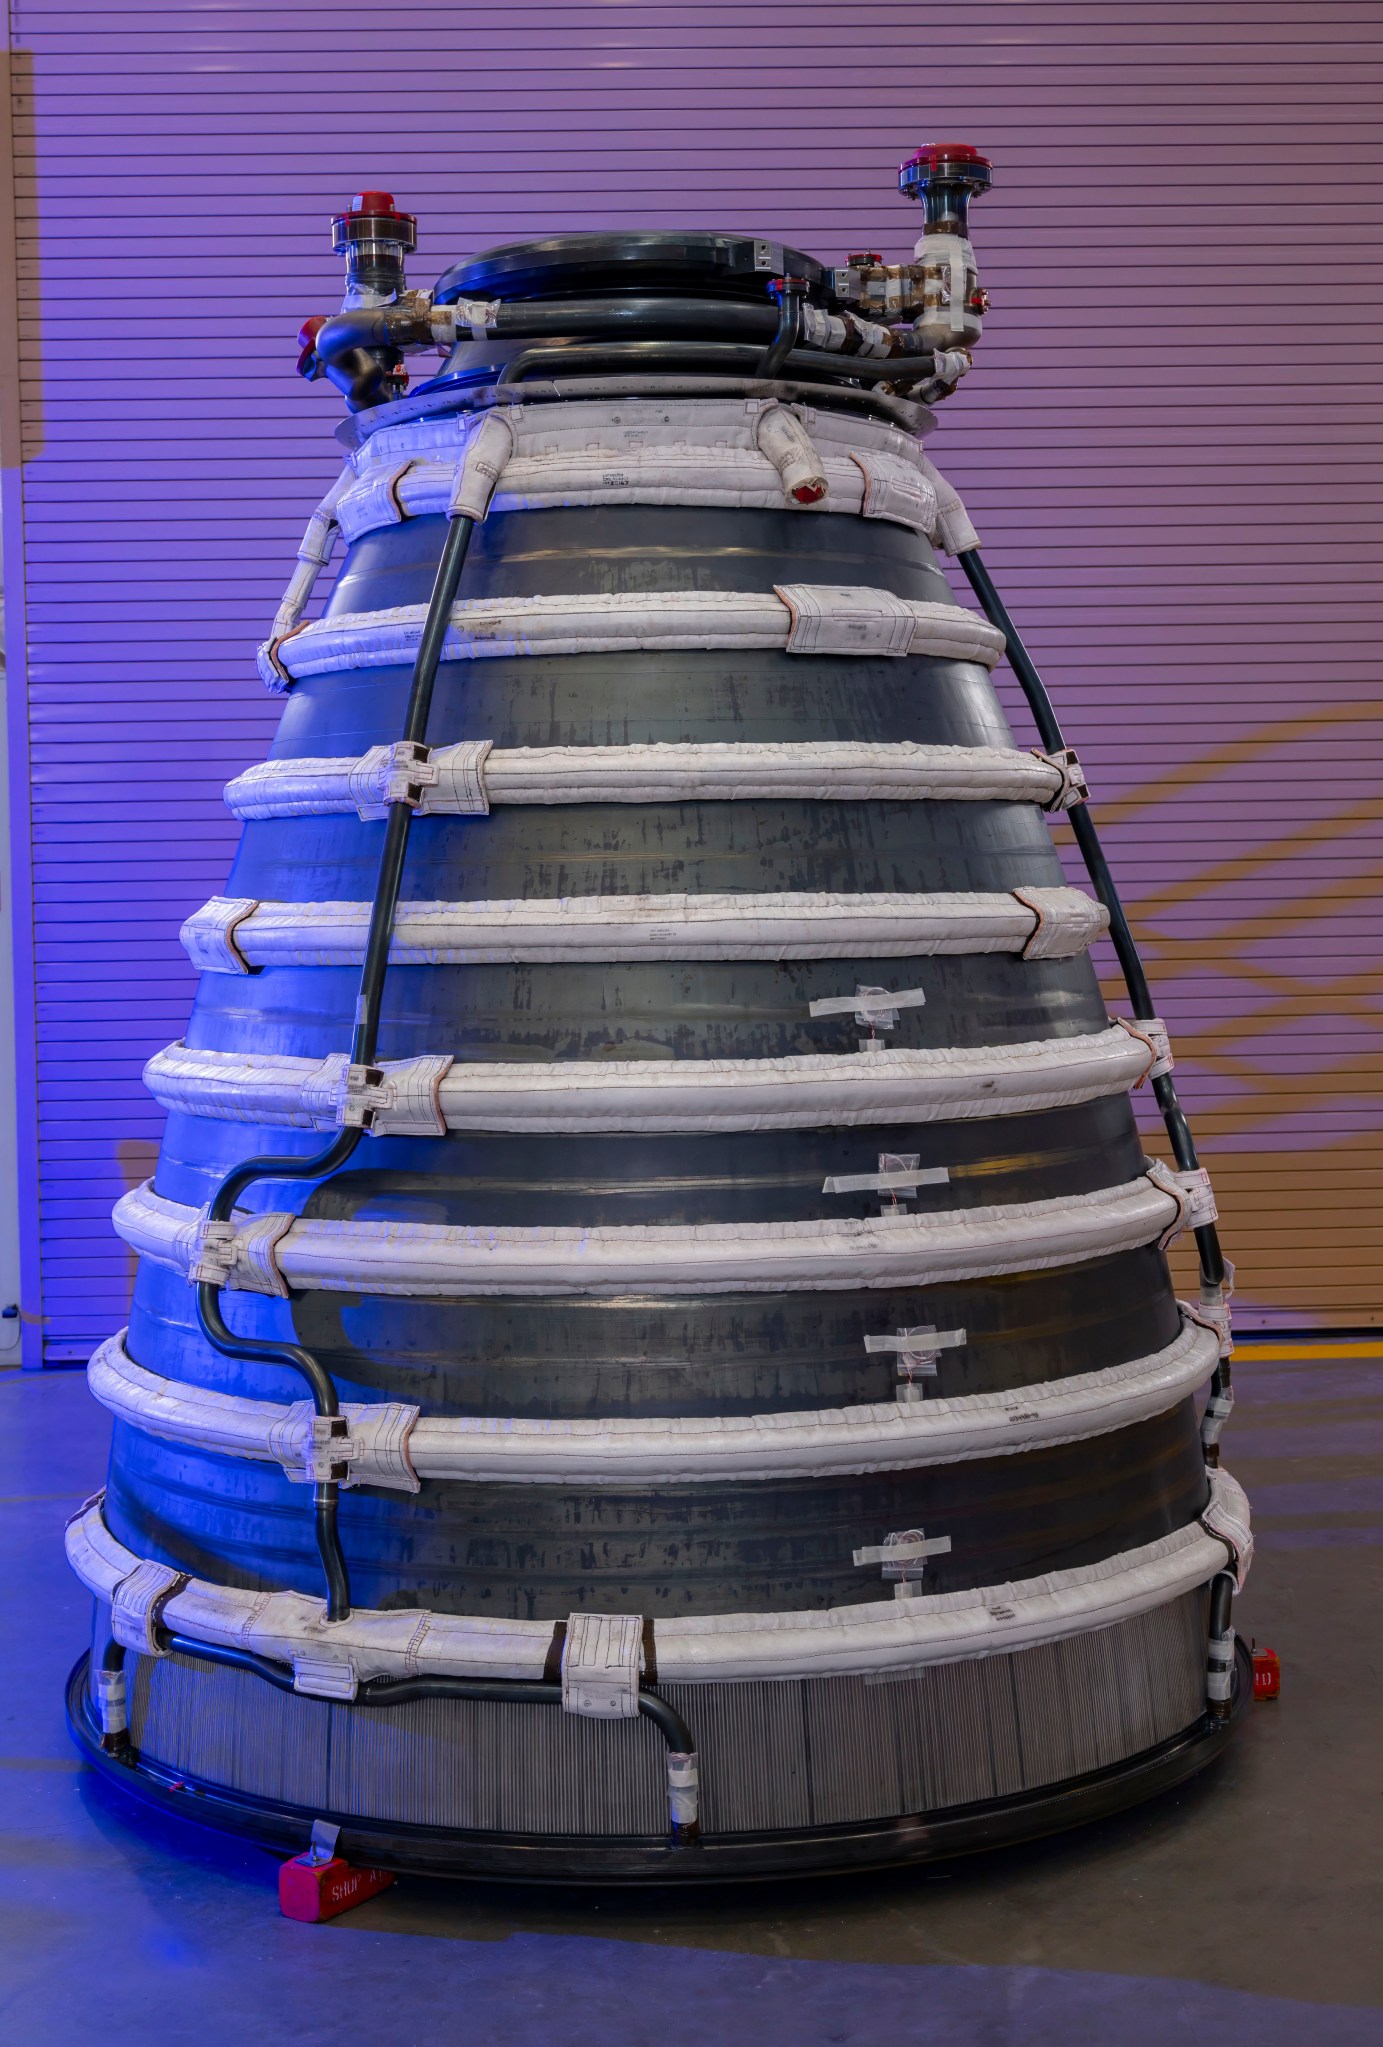 RS-25 engine with second production nozzle installed